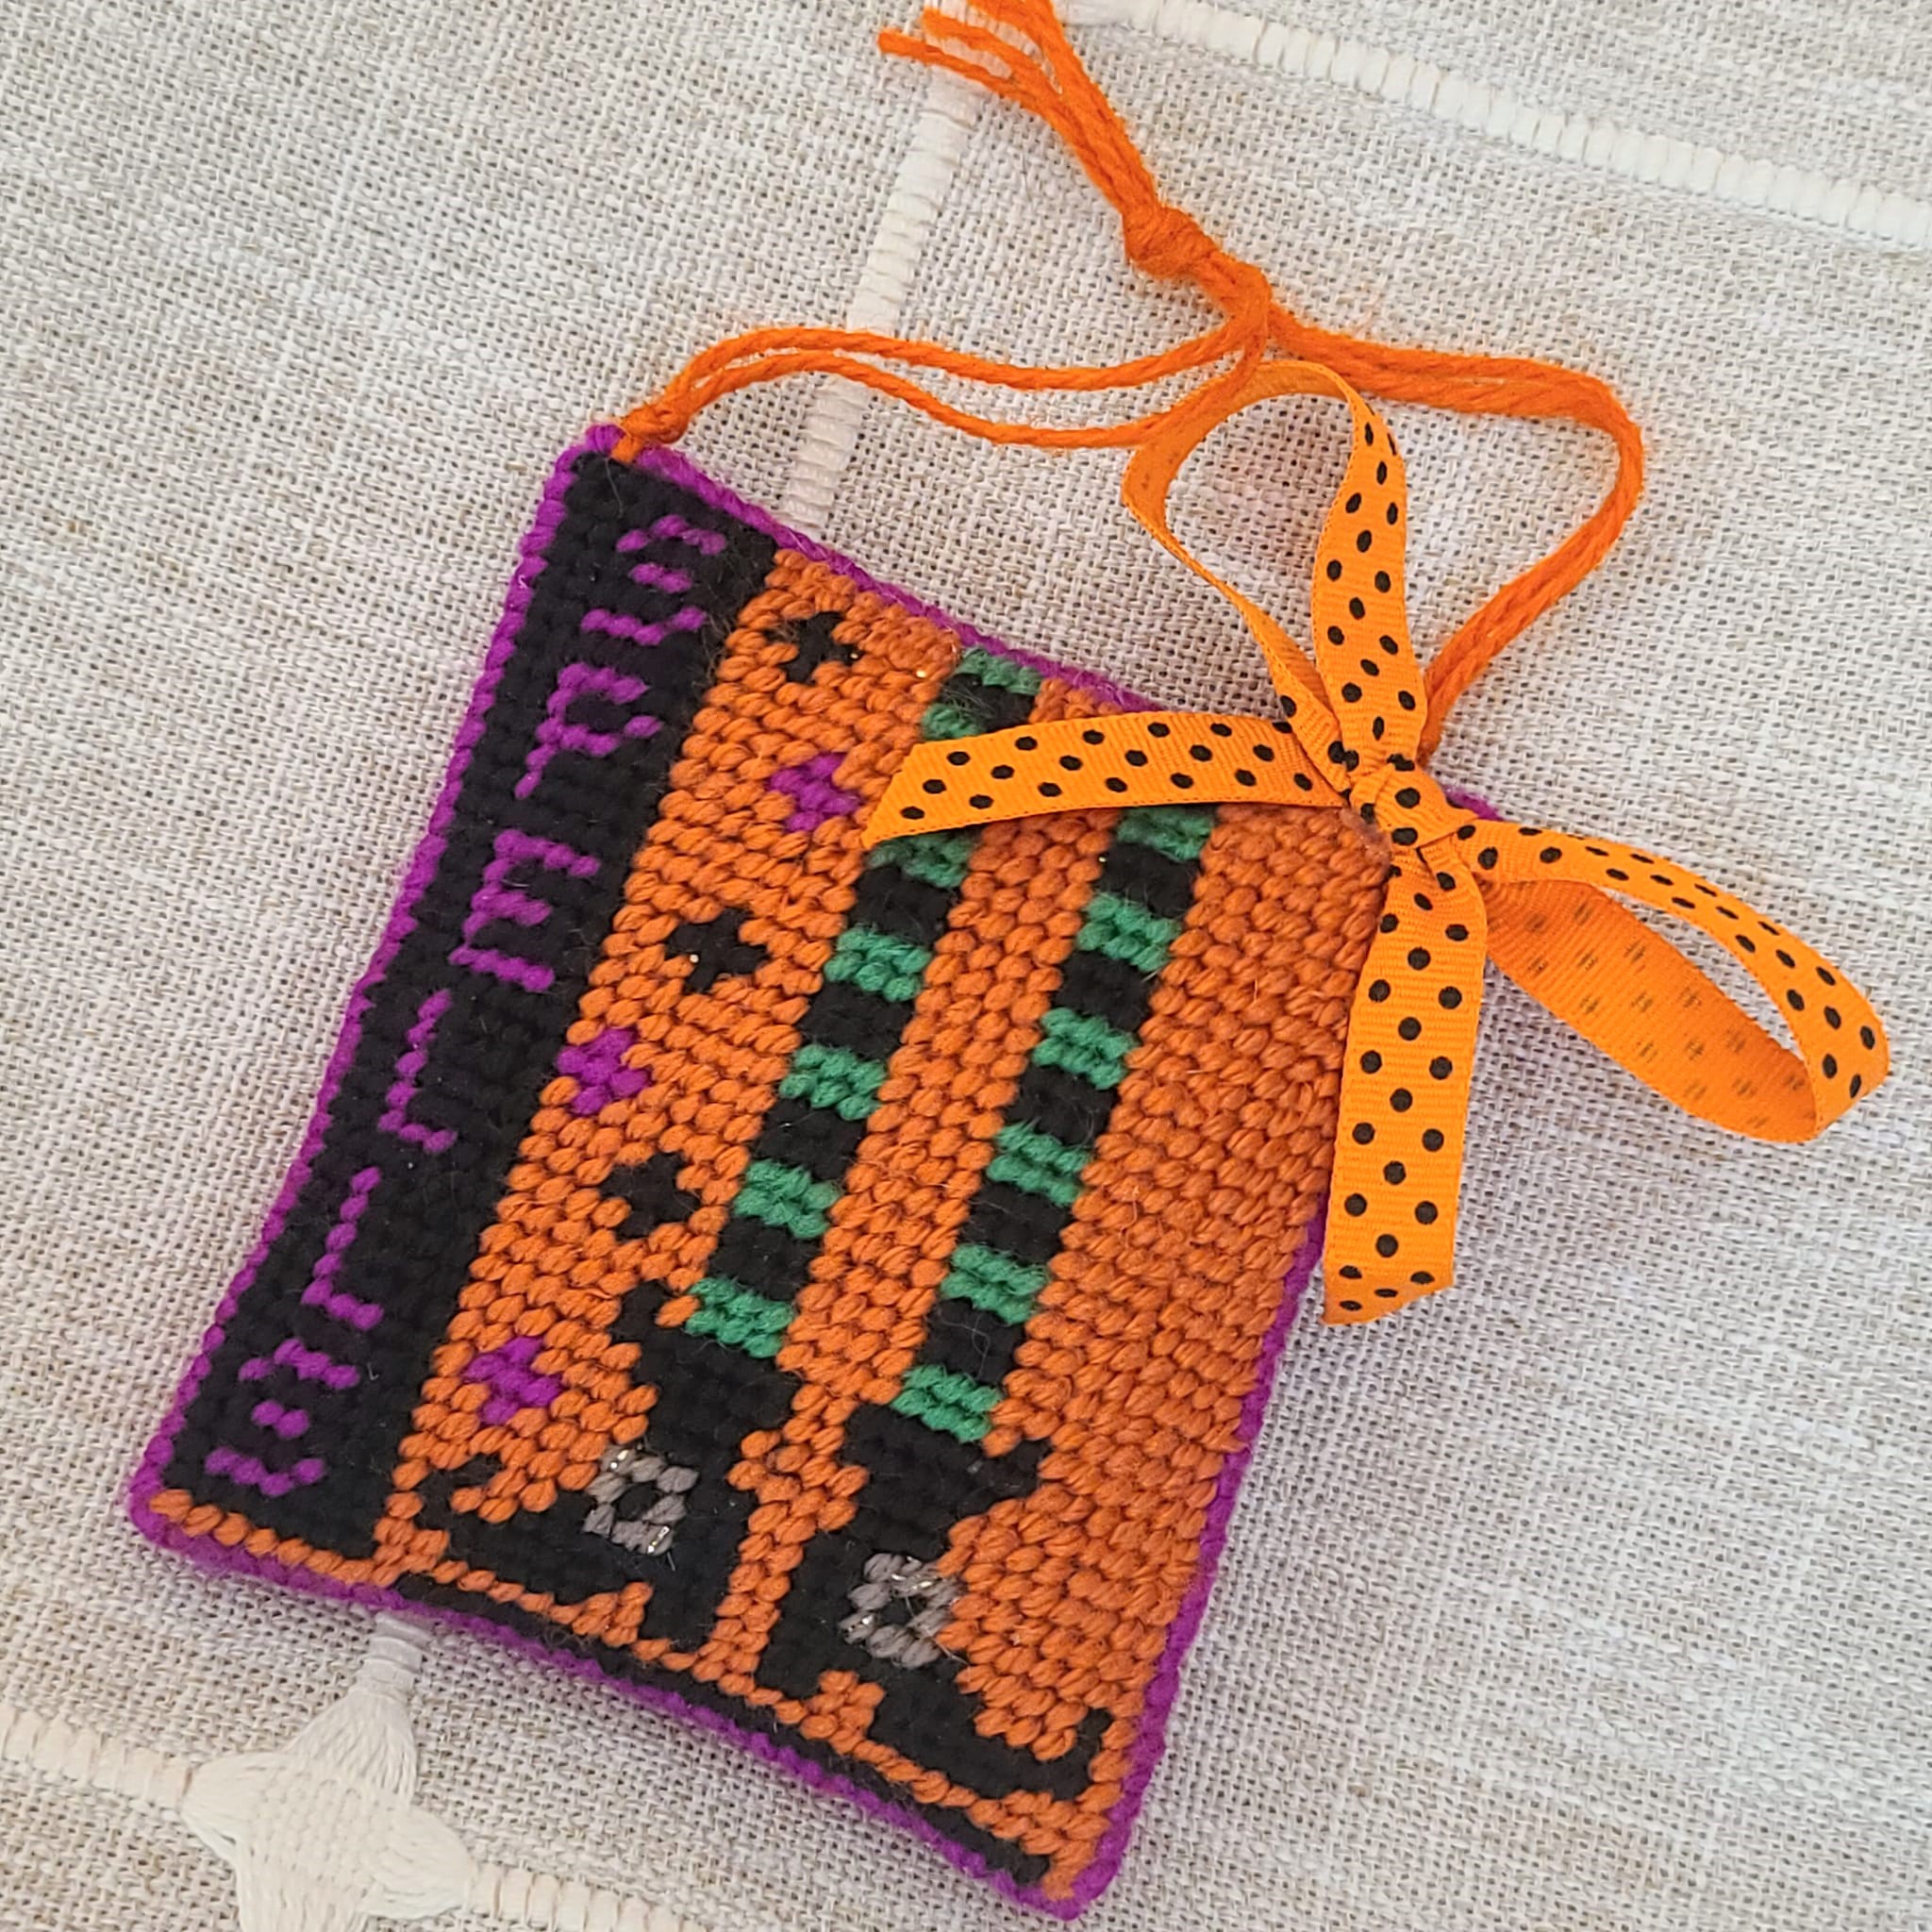 Halloween finished needlepoint SPELLS witch legs ornament